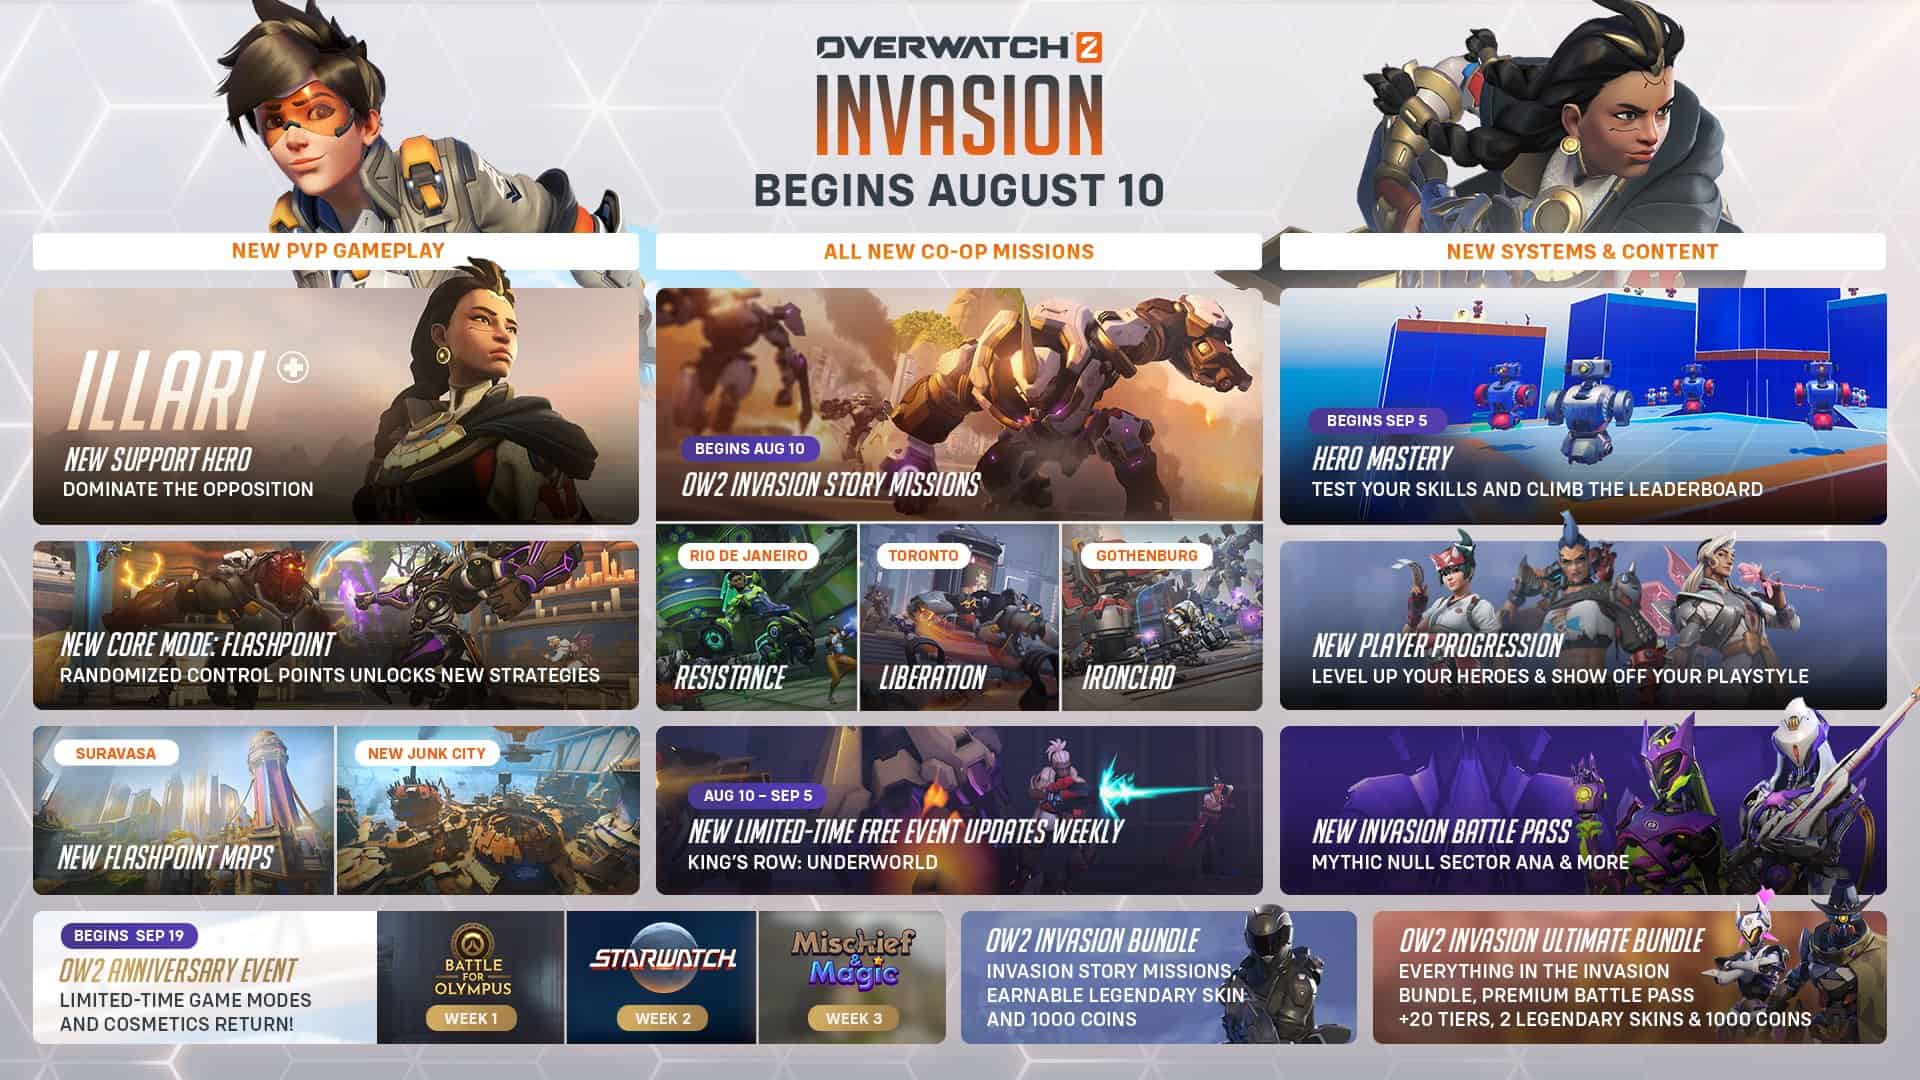 Overwatch 2 invasion coming to PlayStation 4 and Xbox One.